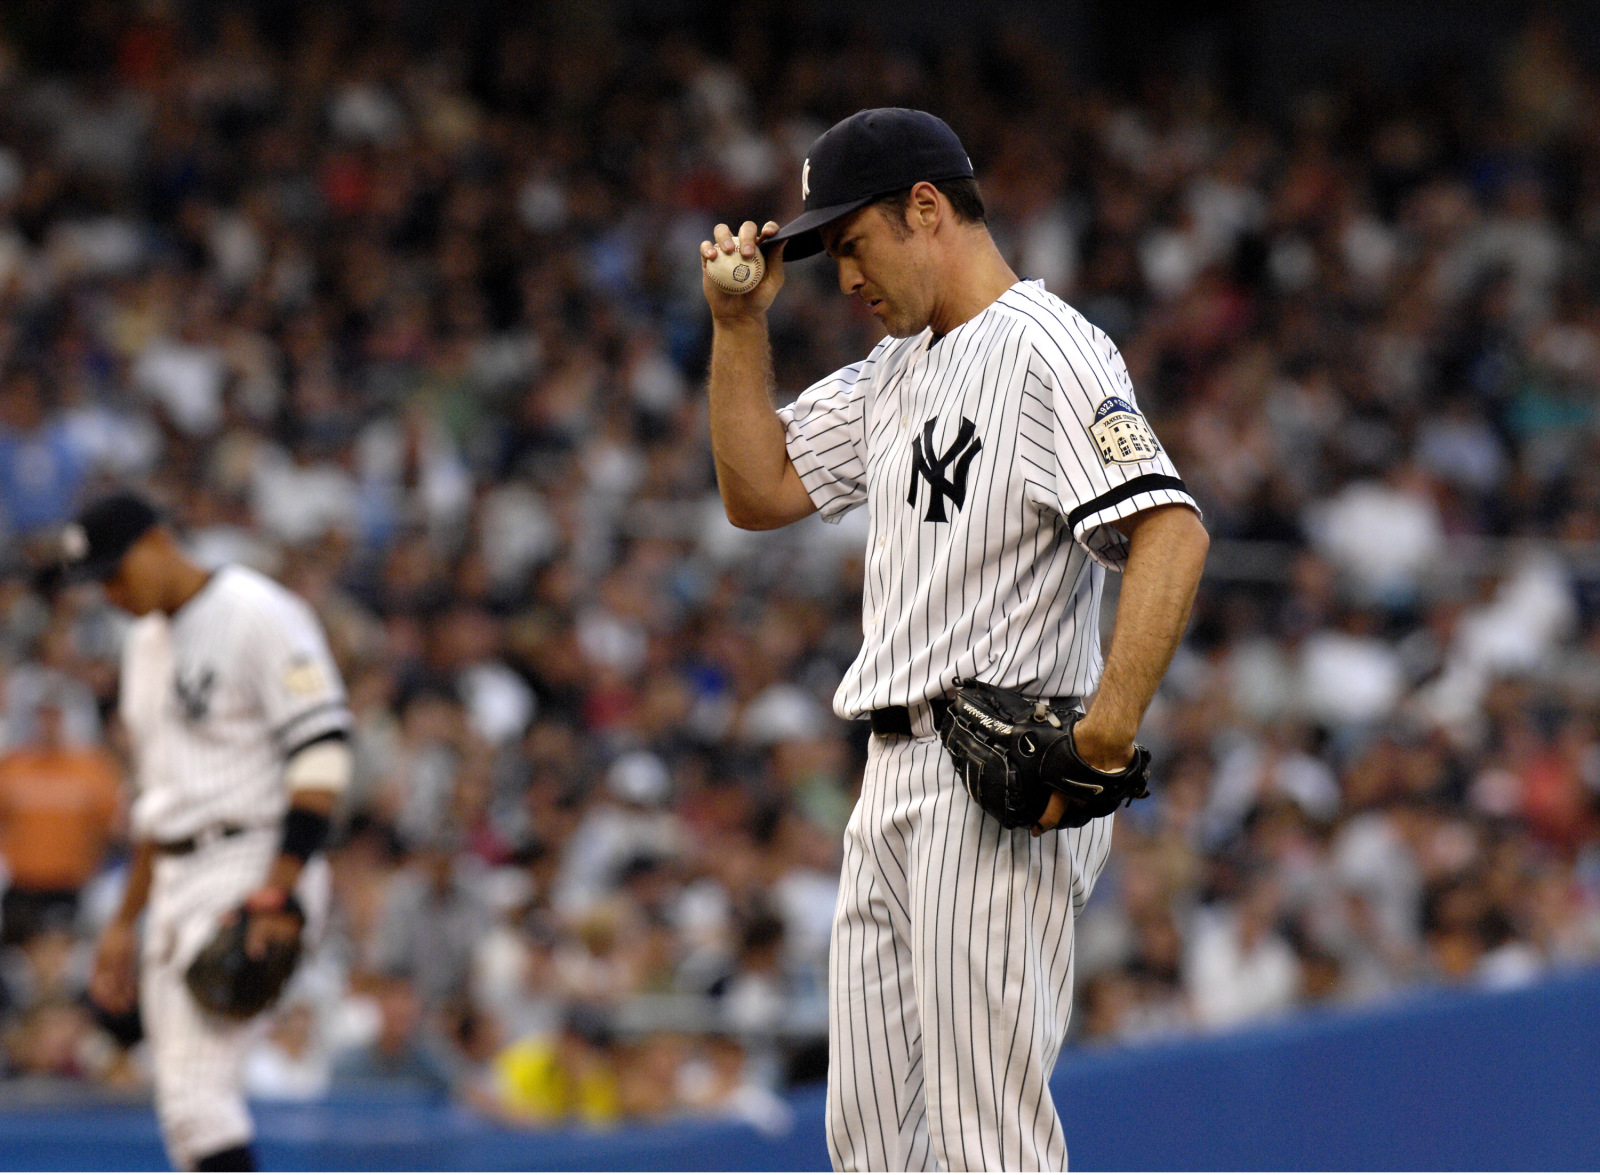 New York Yankees to hold Mike Mussina Hall of Fame Celebration on